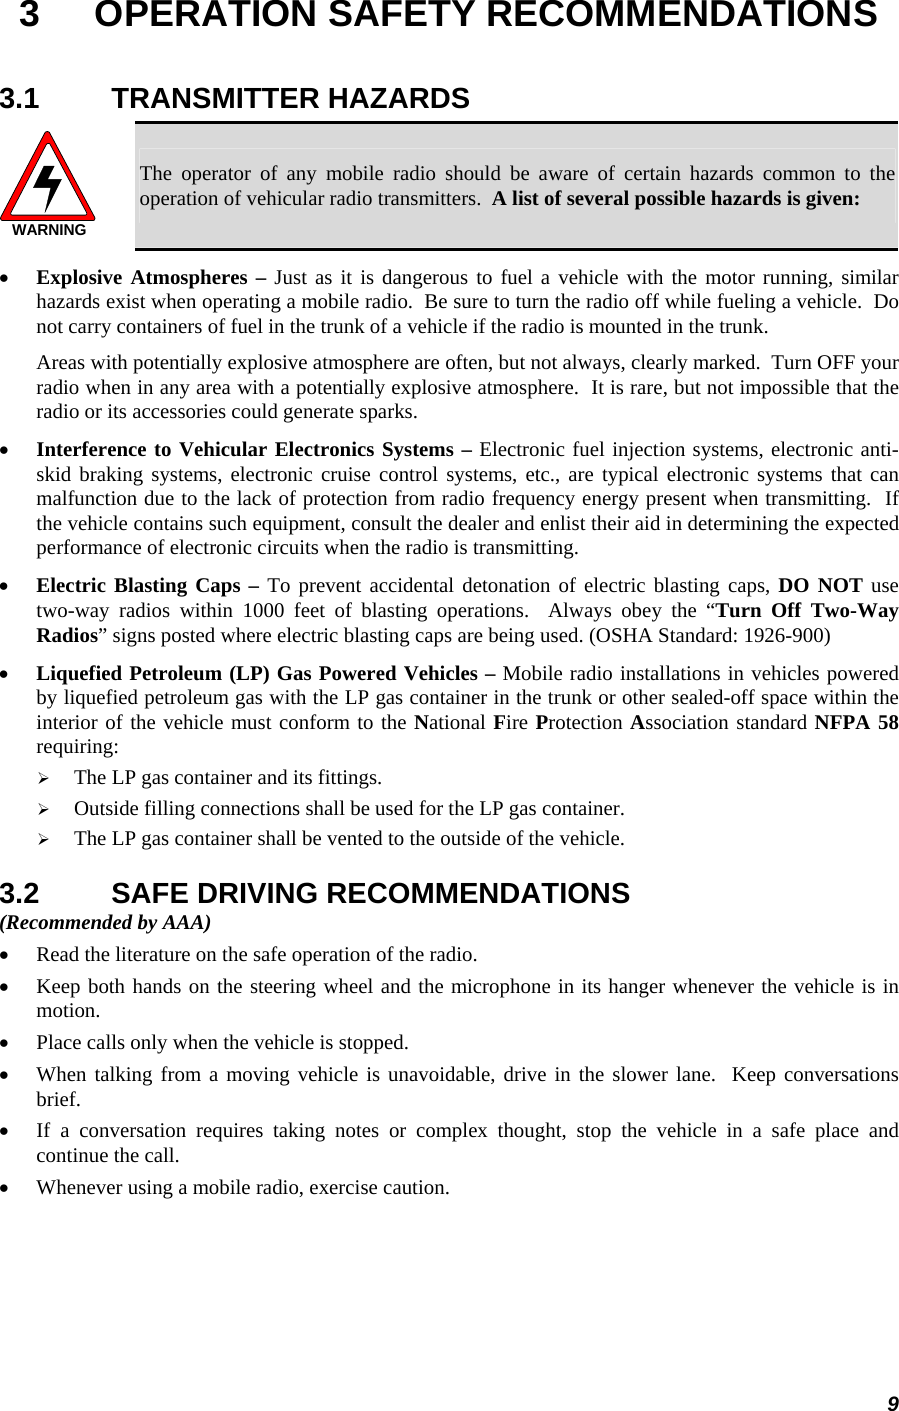 9 3  OPERATION SAFETY RECOMMENDATIONS 3.1 TRANSMITTER HAZARDS WARNING The operator of any mobile radio should be aware of certain hazards common to the operation of vehicular radio transmitters.  A list of several possible hazards is given: •  Explosive Atmospheres – Just as it is dangerous to fuel a vehicle with the motor running, similar hazards exist when operating a mobile radio.  Be sure to turn the radio off while fueling a vehicle.  Do not carry containers of fuel in the trunk of a vehicle if the radio is mounted in the trunk. Areas with potentially explosive atmosphere are often, but not always, clearly marked.  Turn OFF your radio when in any area with a potentially explosive atmosphere.  It is rare, but not impossible that the radio or its accessories could generate sparks. •  Interference to Vehicular Electronics Systems – Electronic fuel injection systems, electronic anti-skid braking systems, electronic cruise control systems, etc., are typical electronic systems that can malfunction due to the lack of protection from radio frequency energy present when transmitting.  If the vehicle contains such equipment, consult the dealer and enlist their aid in determining the expected performance of electronic circuits when the radio is transmitting. •  Electric Blasting Caps – To prevent accidental detonation of electric blasting caps, DO NOT use two-way radios within 1000 feet of blasting operations.  Always obey the “Turn Off Two-Way Radios” signs posted where electric blasting caps are being used. (OSHA Standard: 1926-900) •  Liquefied Petroleum (LP) Gas Powered Vehicles – Mobile radio installations in vehicles powered by liquefied petroleum gas with the LP gas container in the trunk or other sealed-off space within the interior of the vehicle must conform to the National Fire Protection Association standard NFPA 58 requiring:   The LP gas container and its fittings.   Outside filling connections shall be used for the LP gas container.   The LP gas container shall be vented to the outside of the vehicle. 3.2  SAFE DRIVING RECOMMENDATIONS (Recommended by AAA) •  Read the literature on the safe operation of the radio. •  Keep both hands on the steering wheel and the microphone in its hanger whenever the vehicle is in motion. •  Place calls only when the vehicle is stopped. •  When talking from a moving vehicle is unavoidable, drive in the slower lane.  Keep conversations brief. •  If a conversation requires taking notes or complex thought, stop the vehicle in a safe place and continue the call. •  Whenever using a mobile radio, exercise caution. 